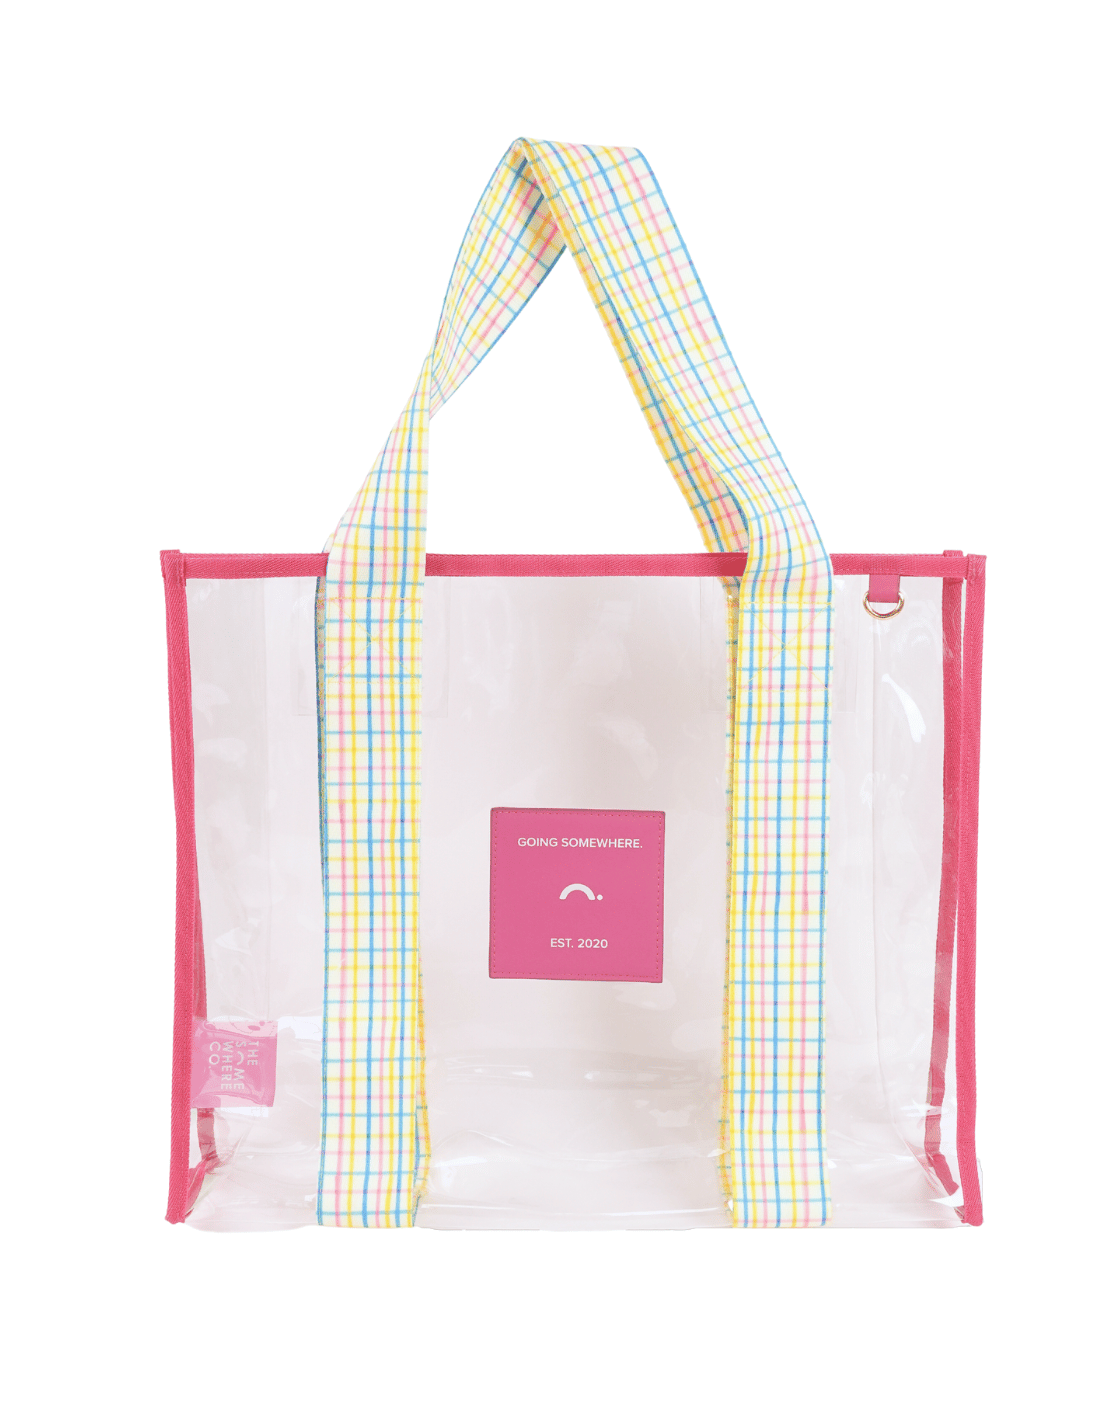 Meltdown Somewhere Tote - Cute Tote Bags - Talking Out of Turn